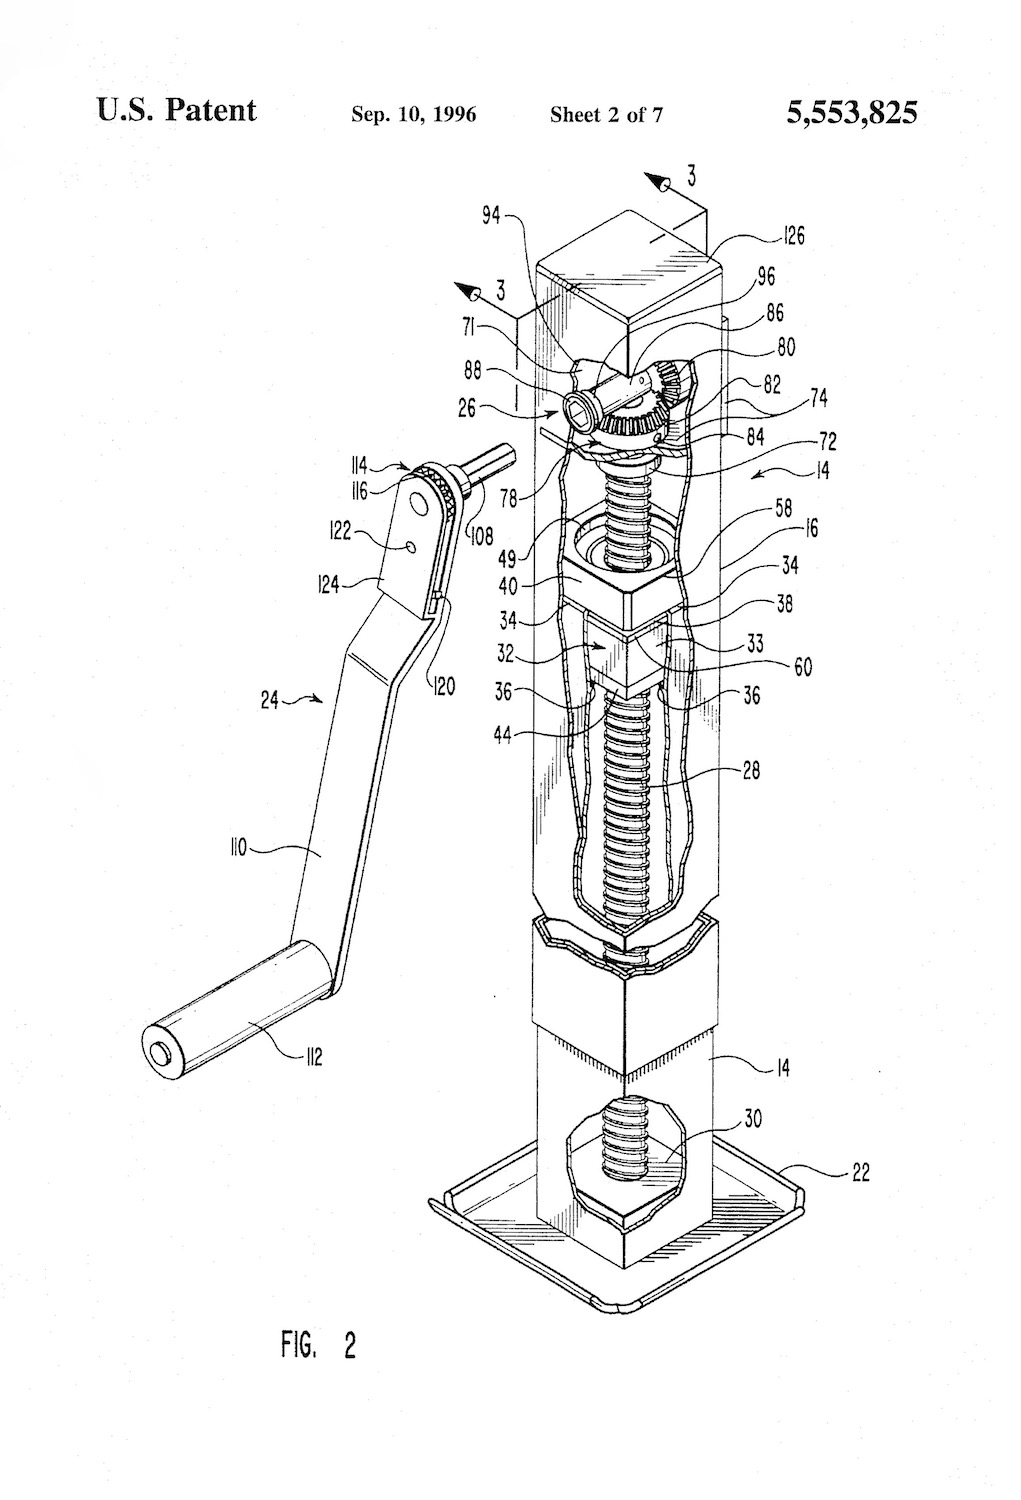 Diagram of a mechanical jack internal screw mechanism and hand crank for Patent US5553825A.